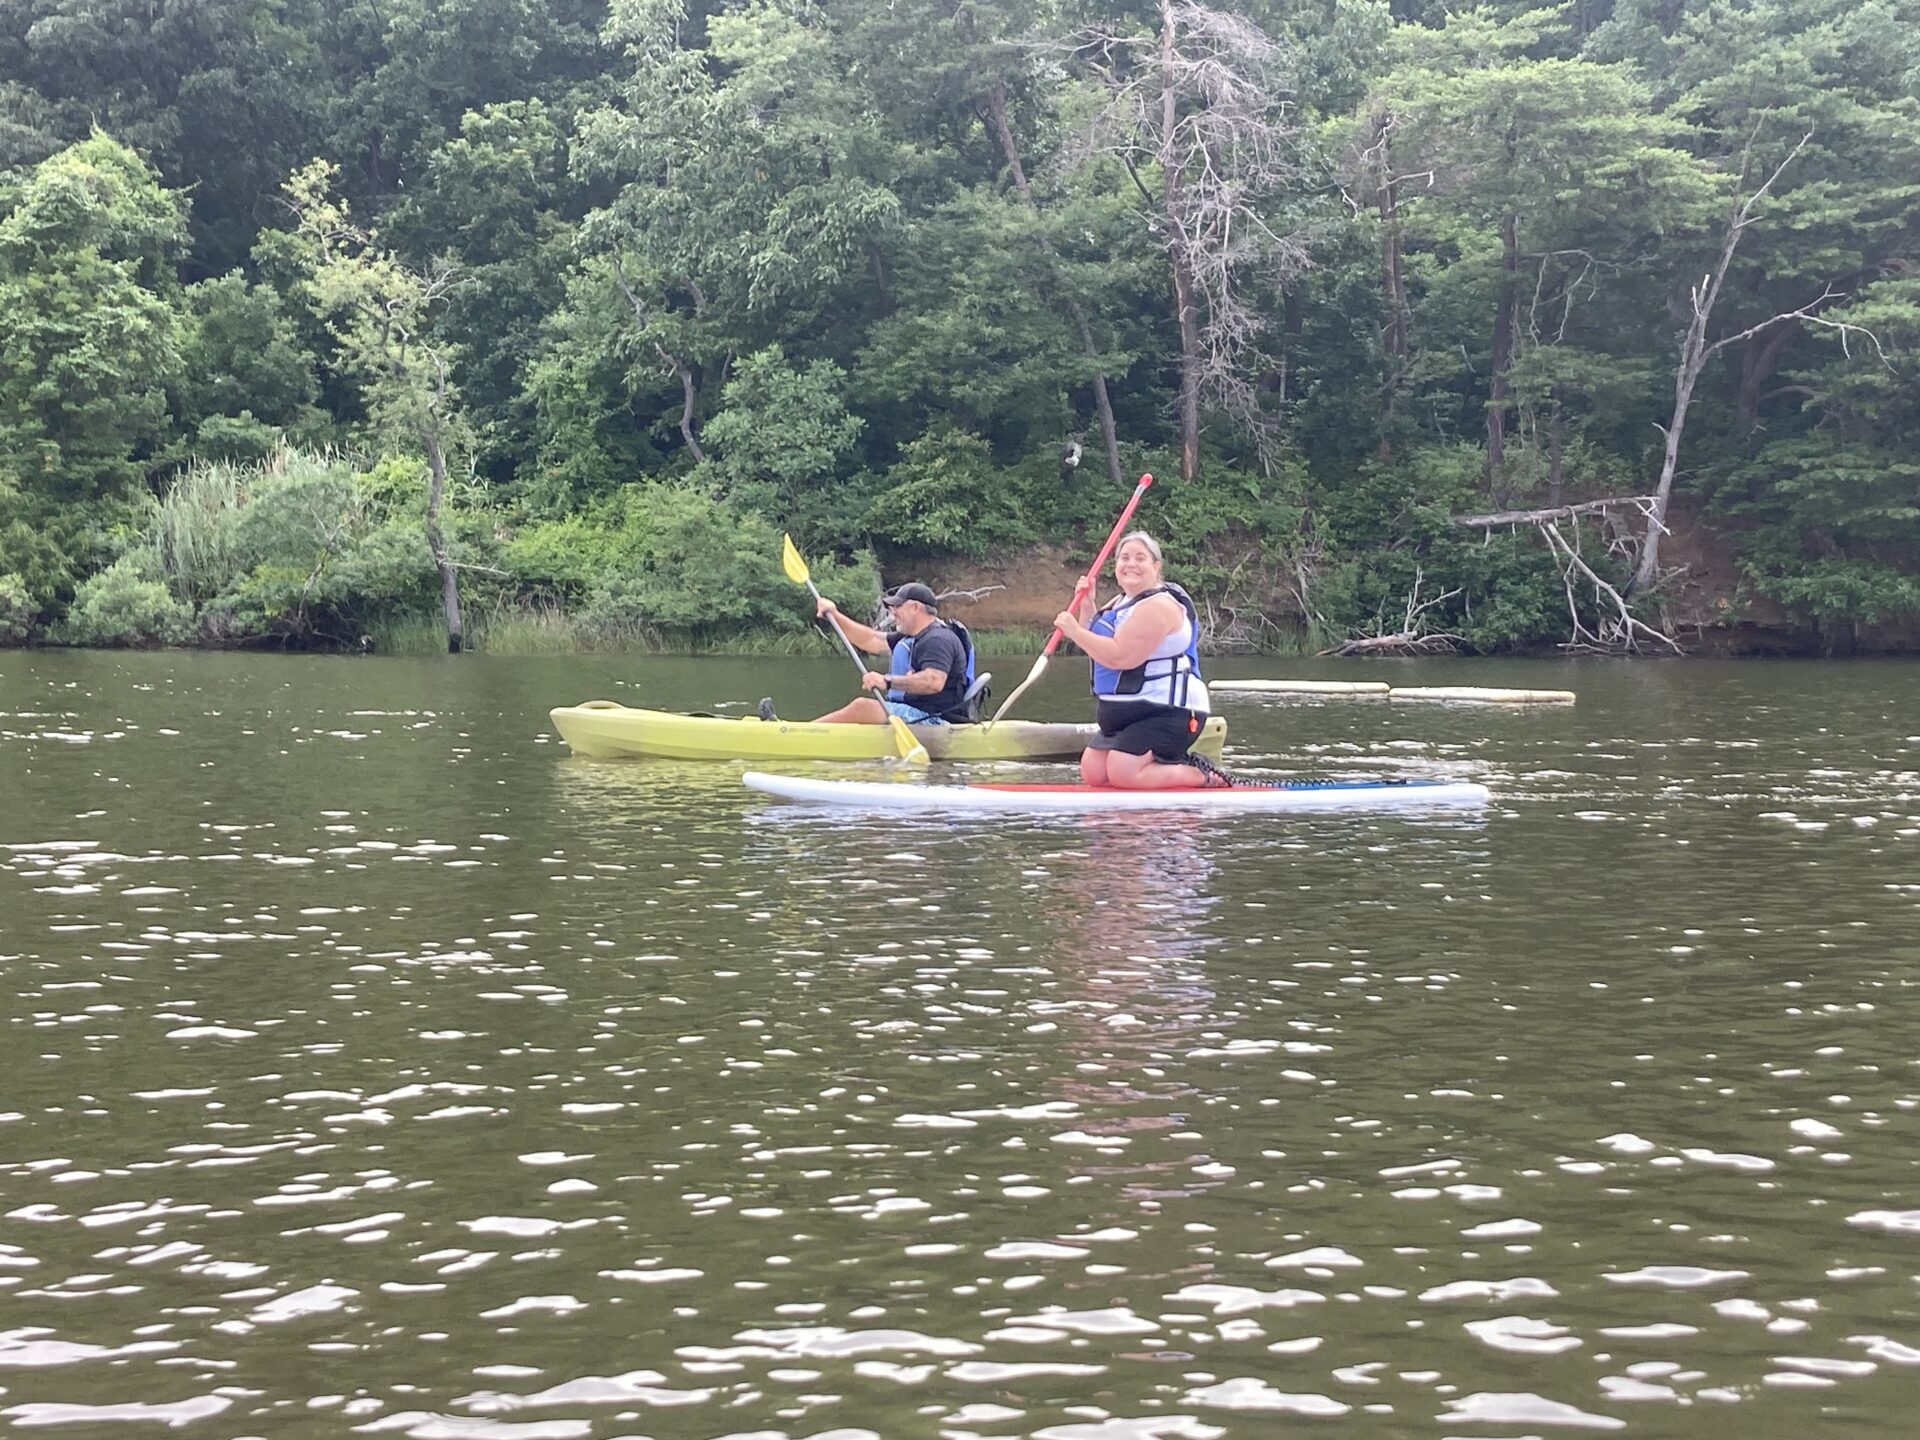 A man and a woman are paddling together on the South River. She is kneeling on a stand up paddle board, and he is sitting in a kayak.